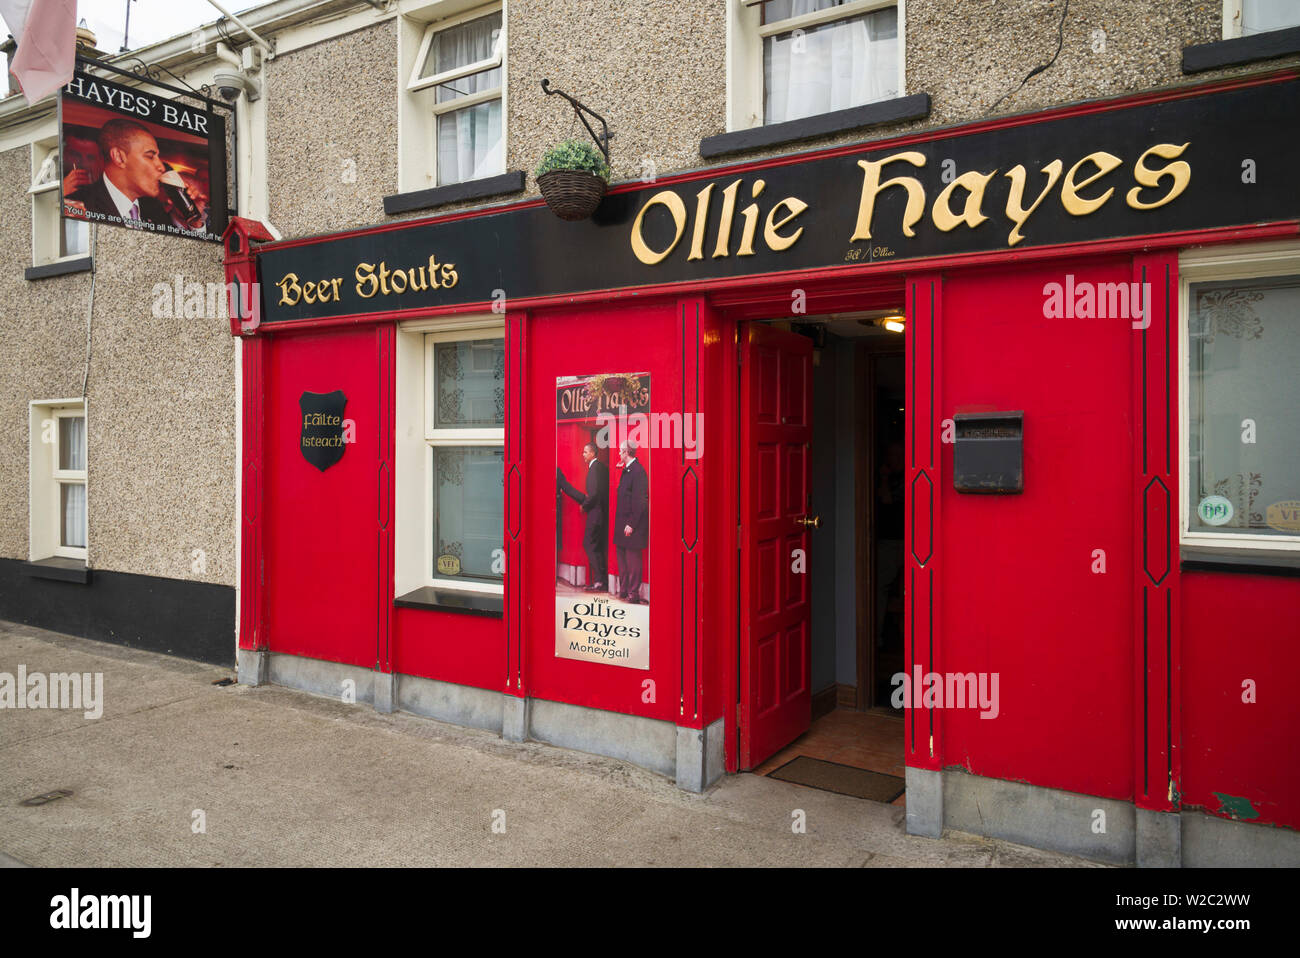 Ireland, County Offaly, Moneygall, Hayes' Bar and Pub, site of US President Barack Obama's visit, exterior Stock Photo